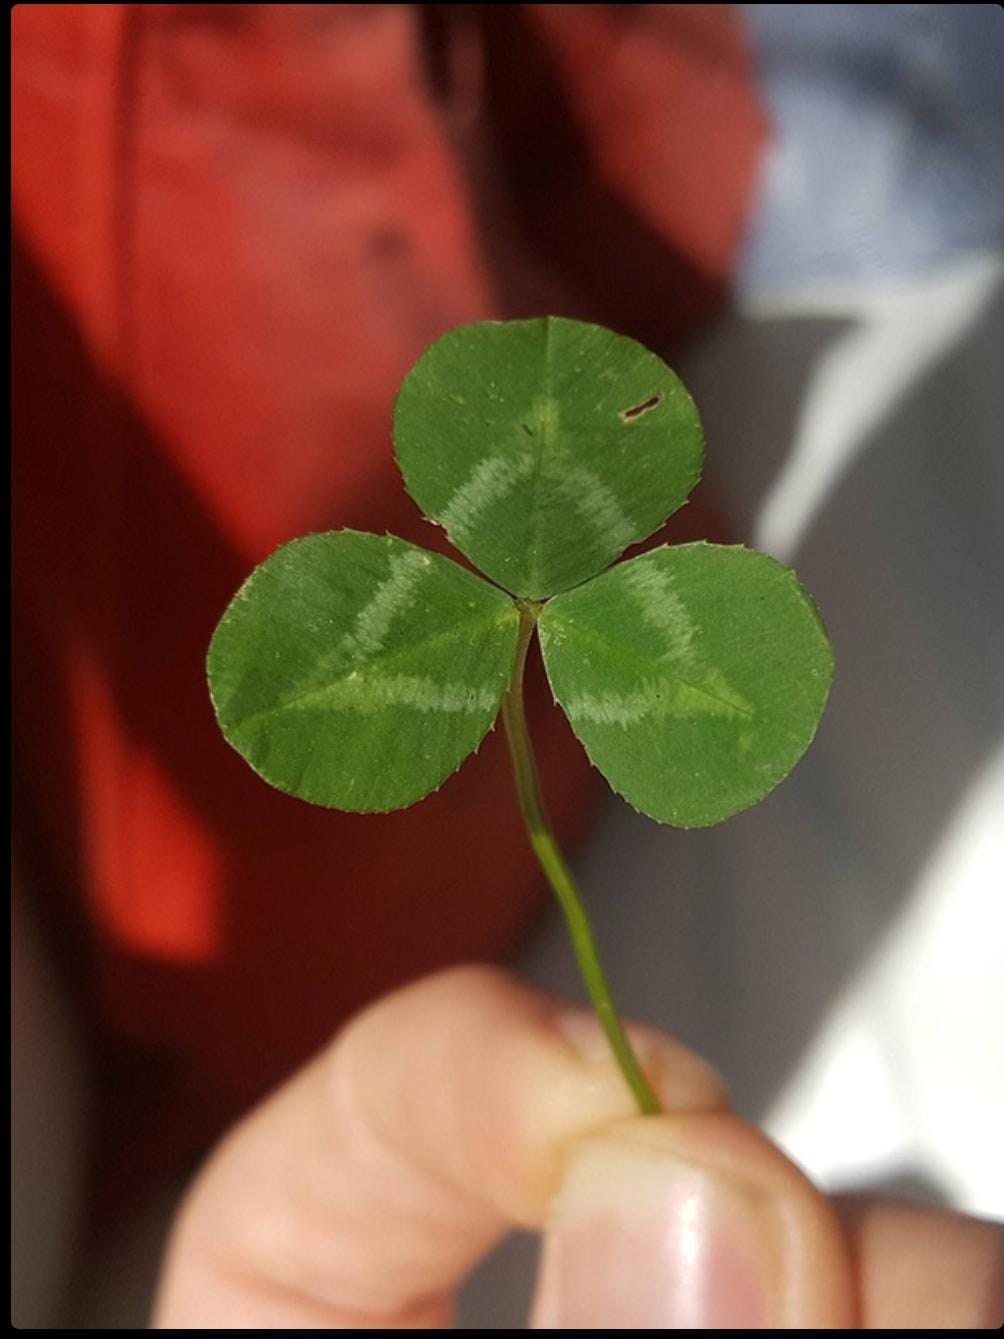 A perfect triangle pattern on this clover